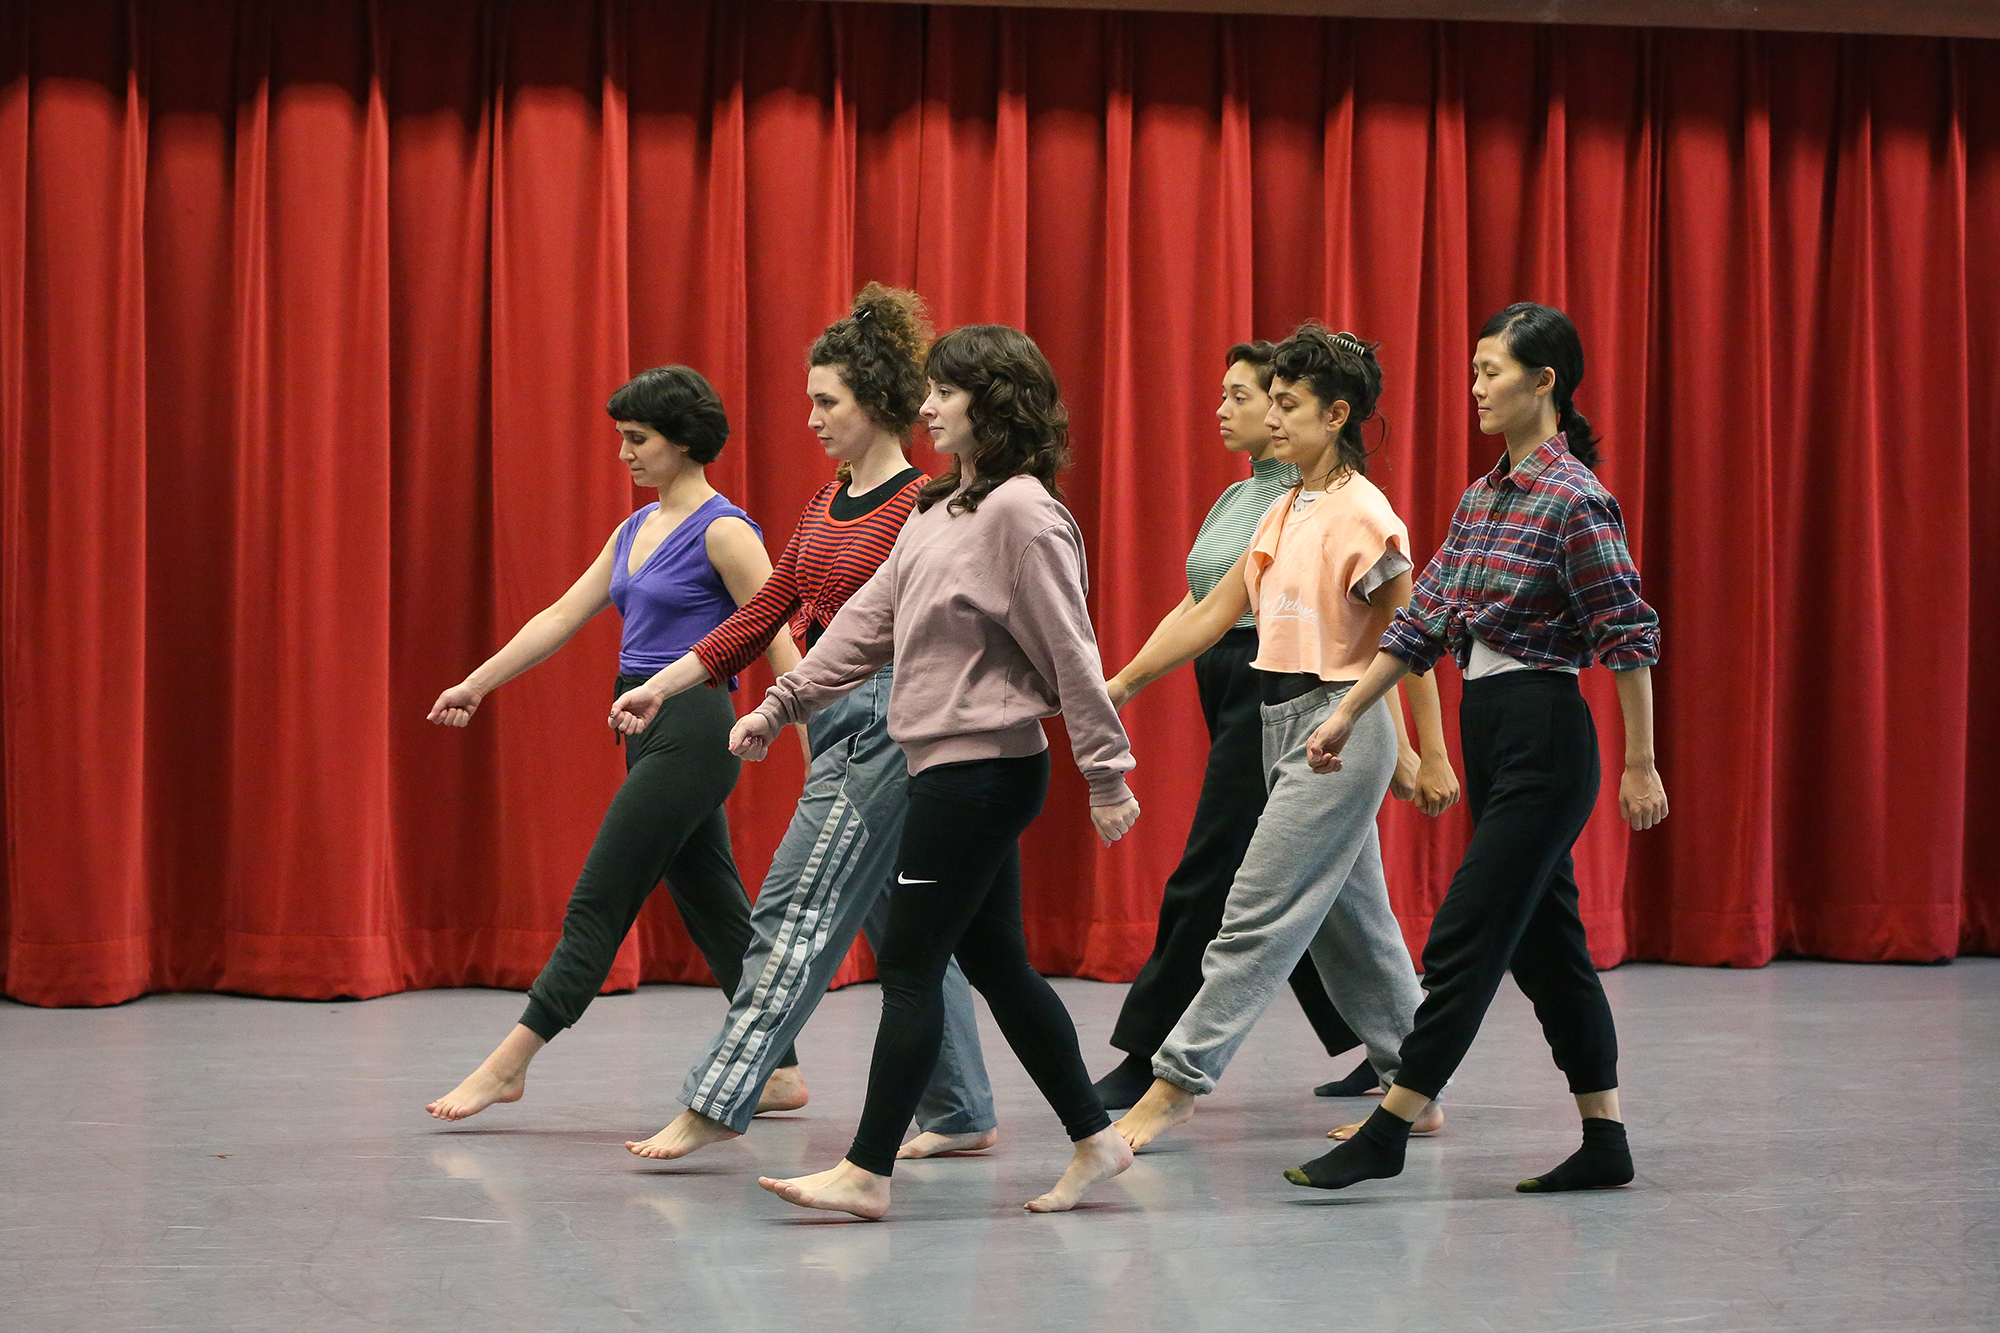 Six casually dressed people walk in unison in a two-line formation in front of a red curtain on a grey floor.